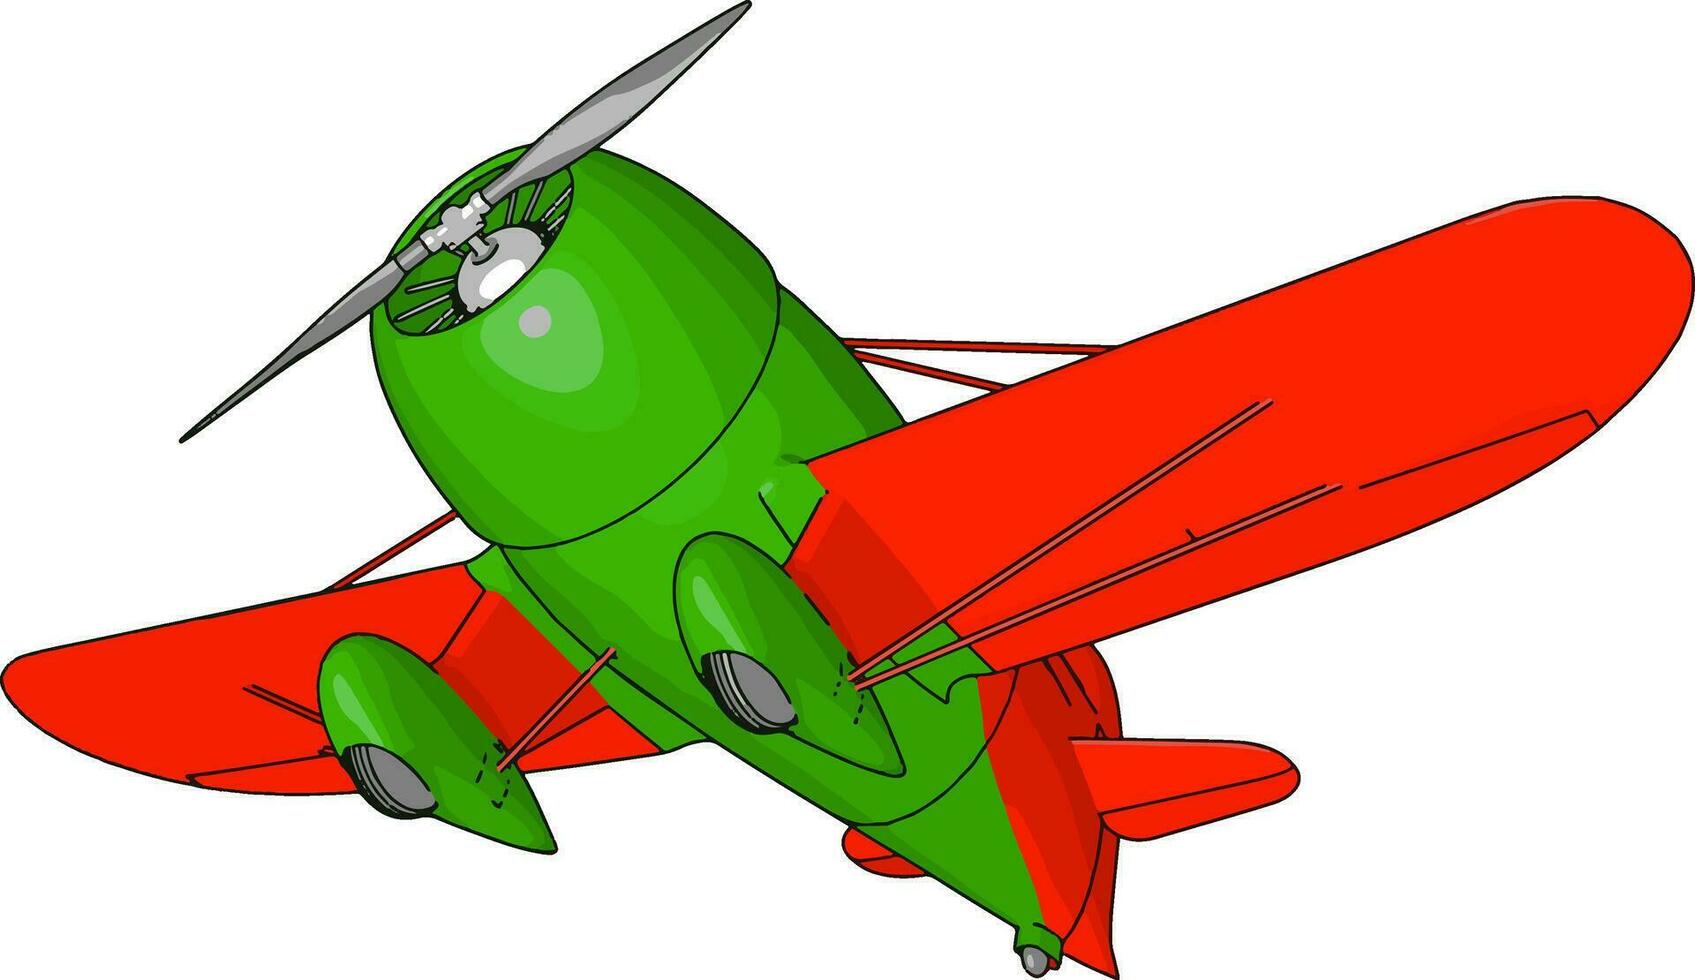 Green and red old retro plane, illustration, vector on white background.